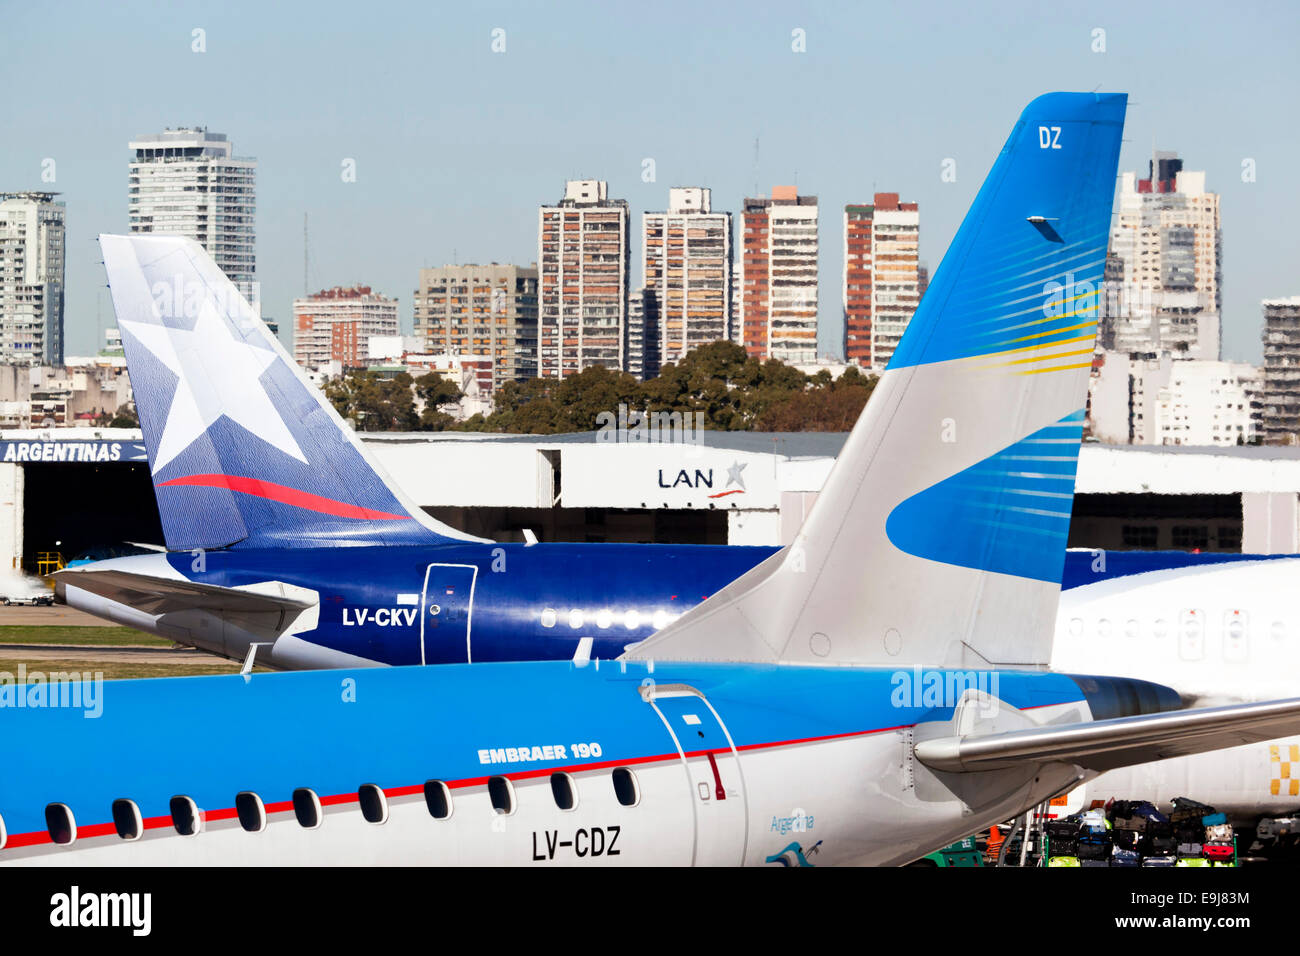 'Lan' and 'Aerolineas Argentinas' airplanes parked in the 'Jorge Newbery' airport (Aeroparque) with the city in background. Buenos Aires, Argentina. Stock Photo